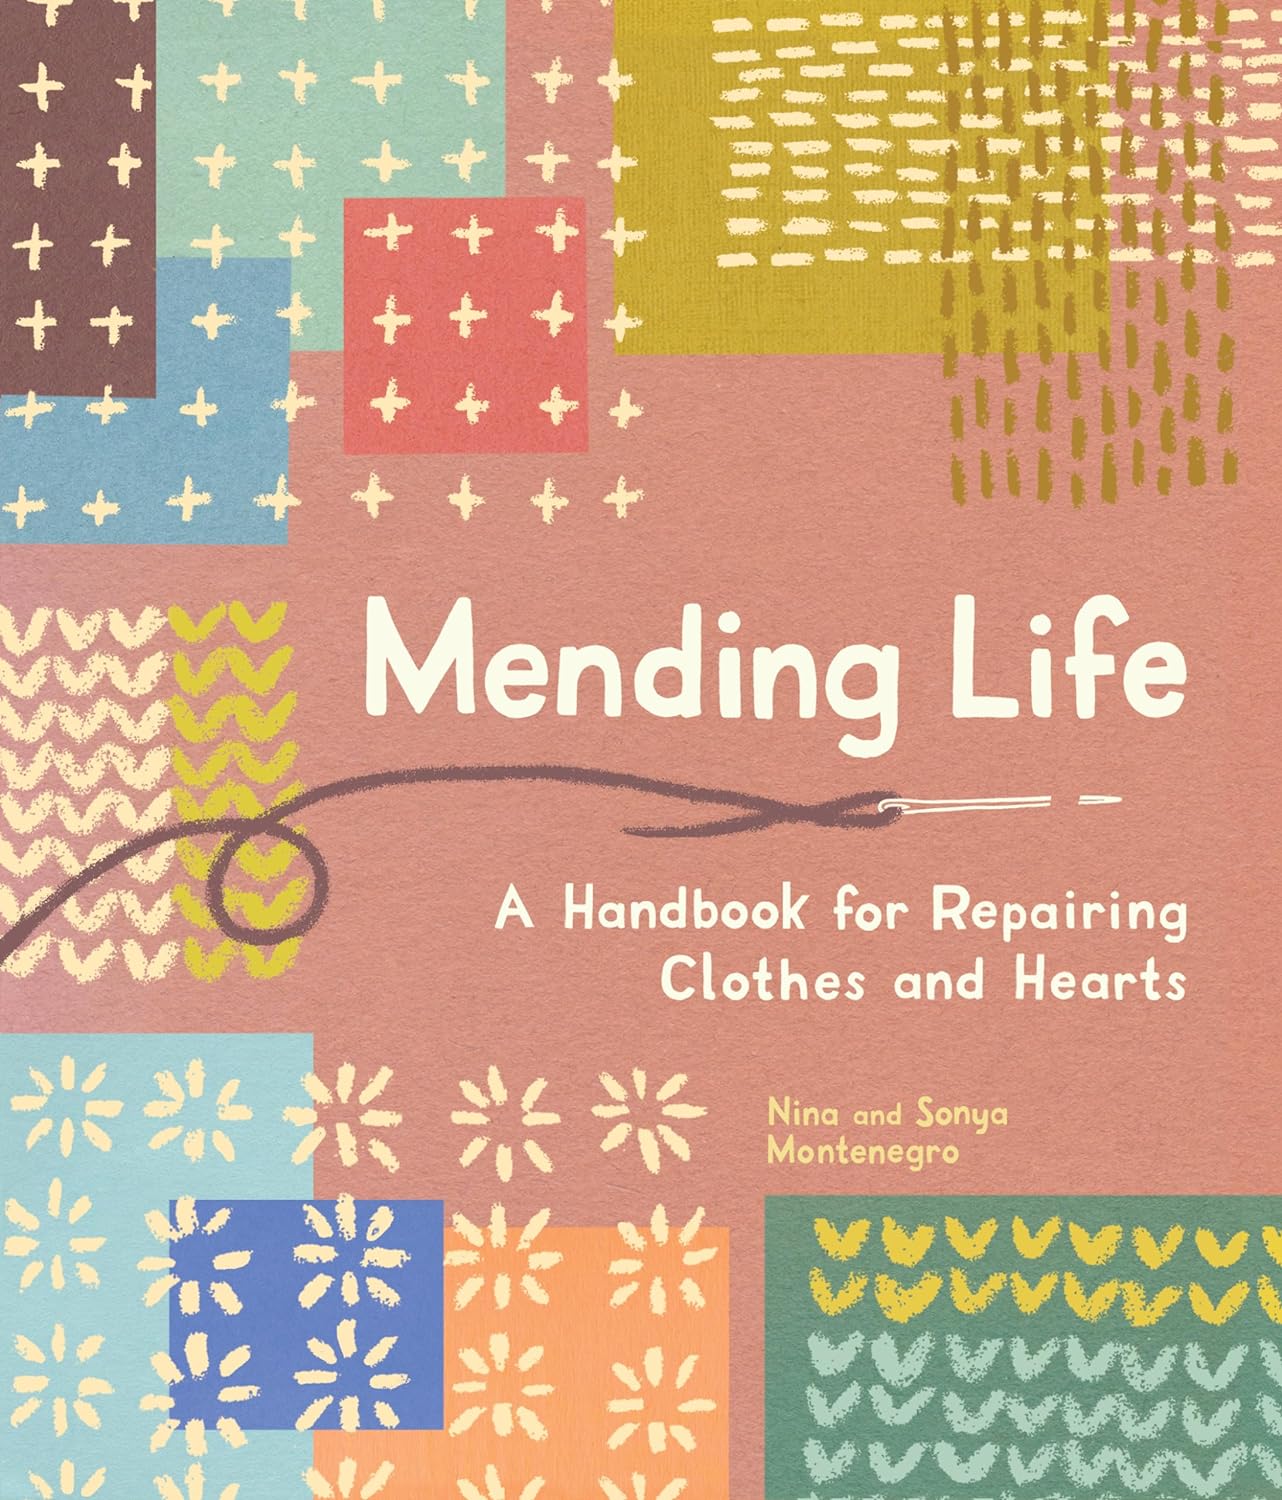 Mending Life: A Handbook for Repairing Clothes and Hearts g, and Patching to Practice Sustainable Fashion and Repair the Clothes You Love) Hardcover